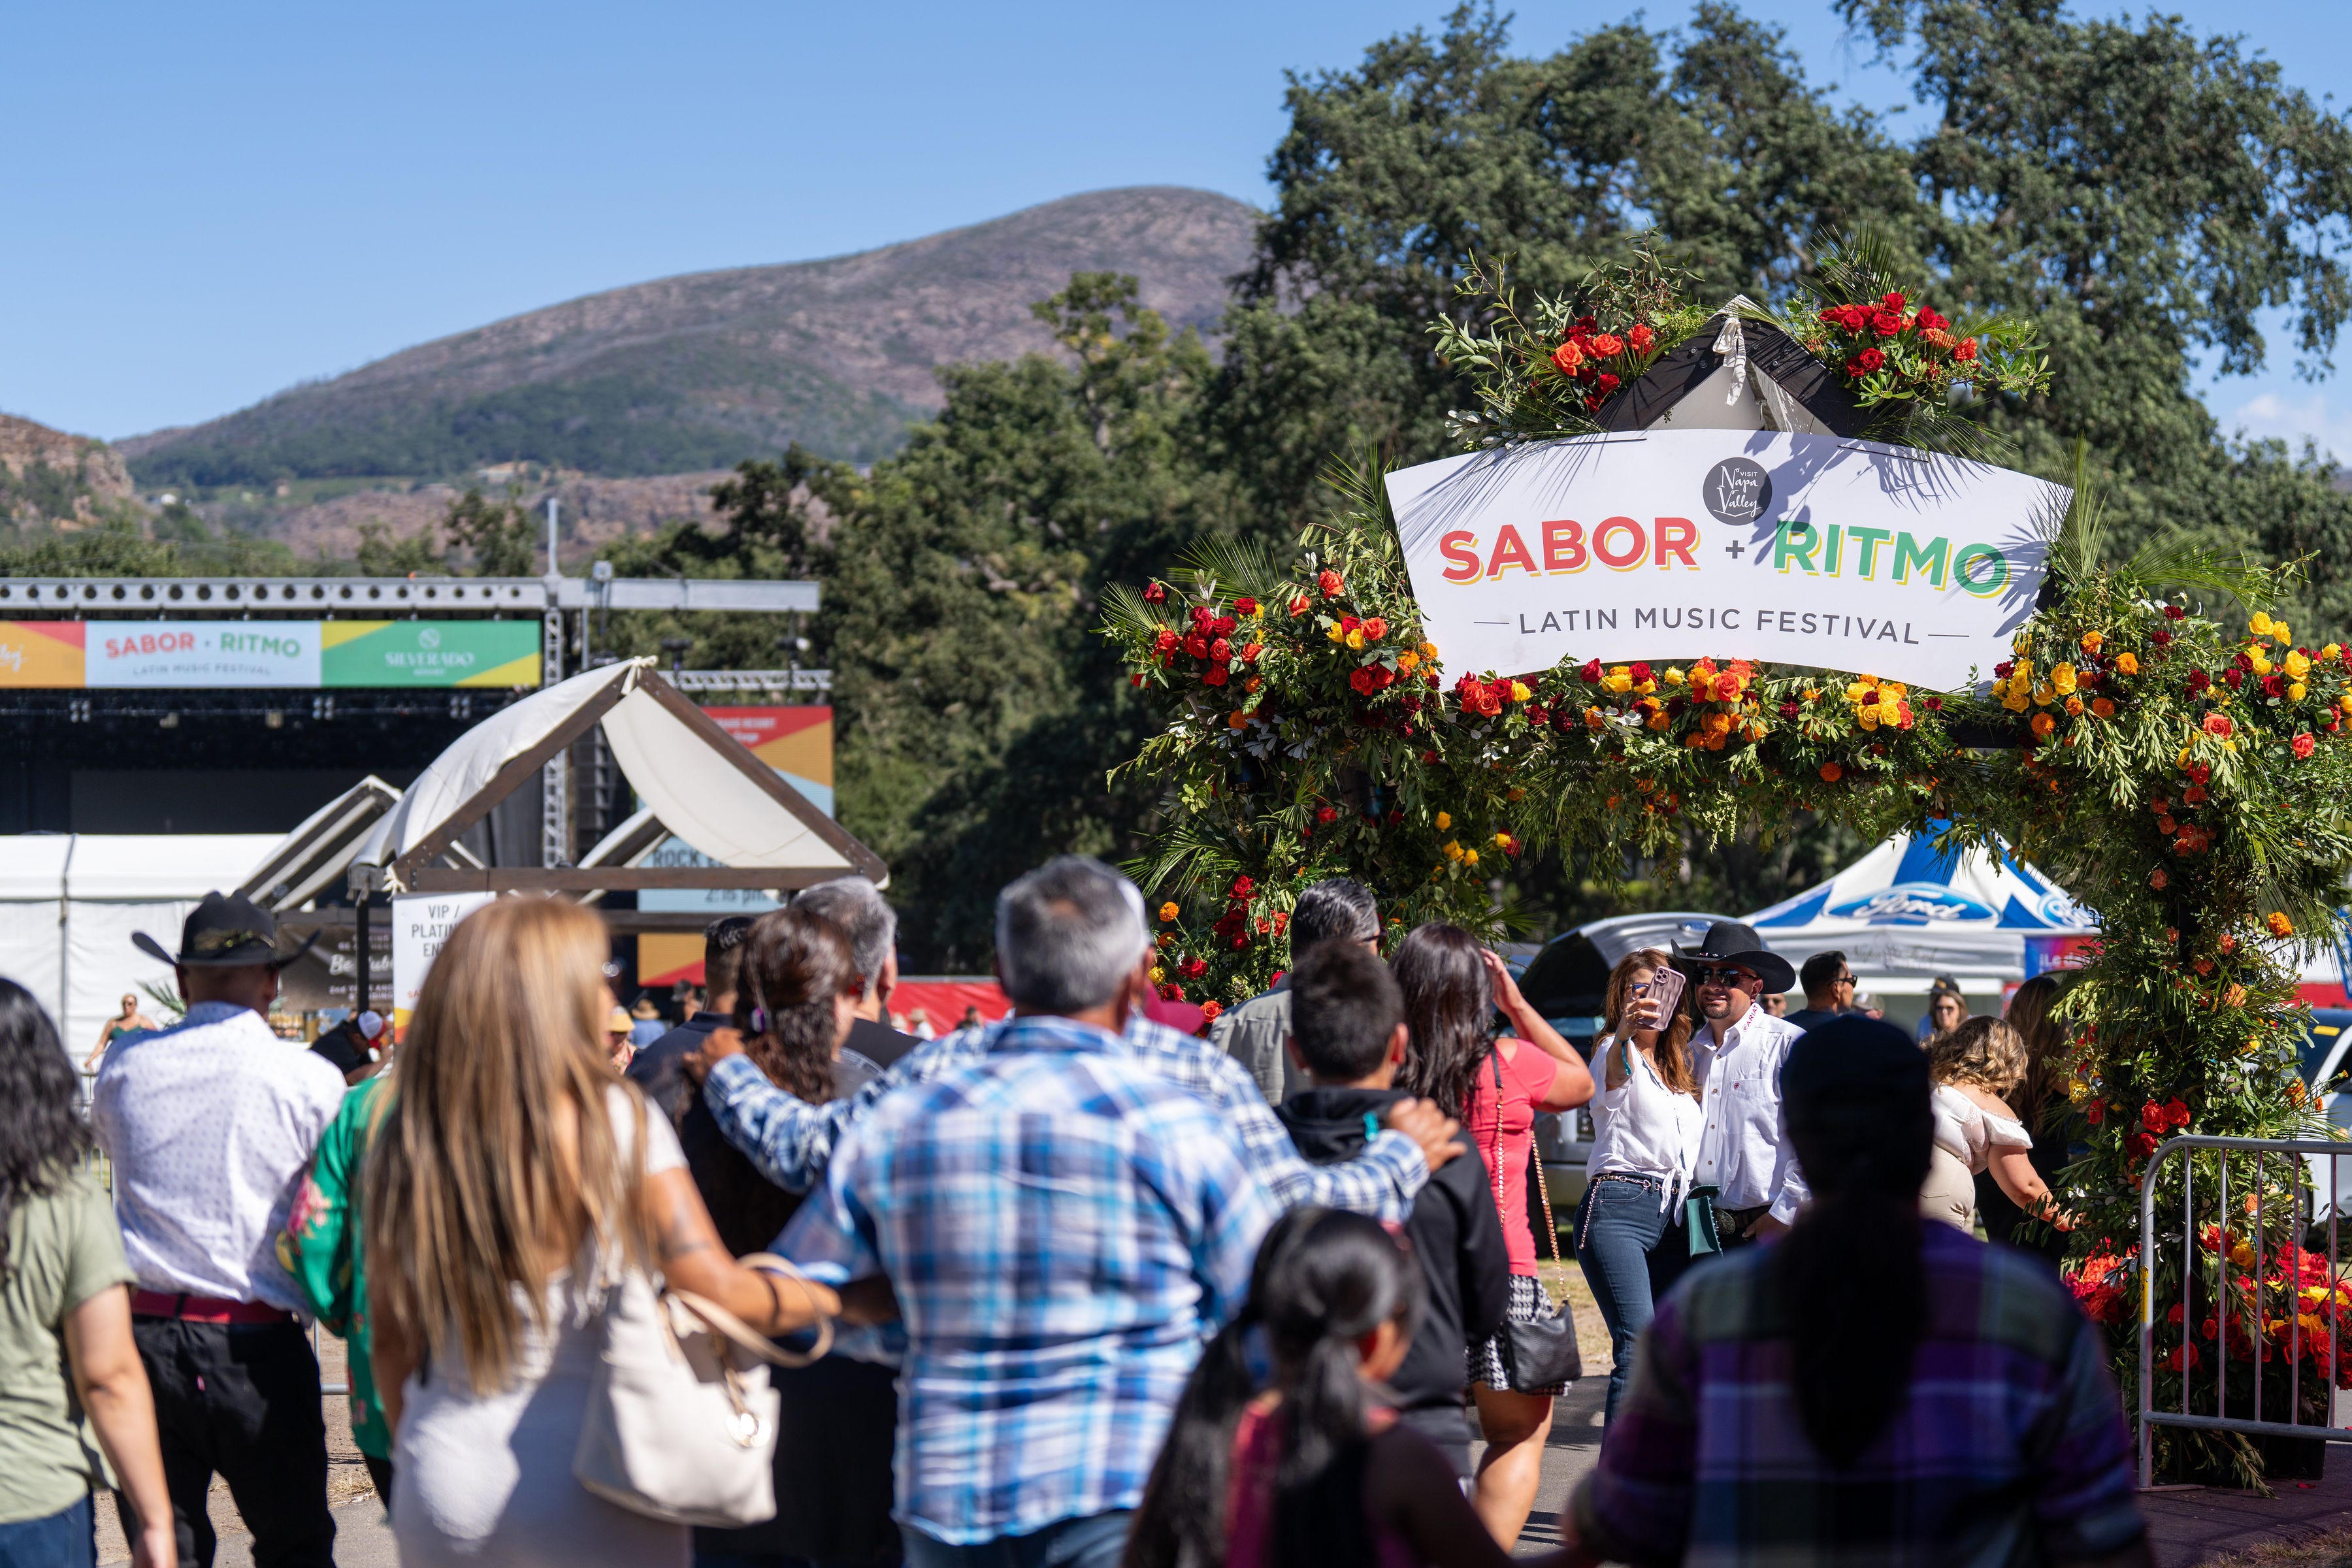 Sabor+Ritmo Festival The inaugural event that amplified Latin culture